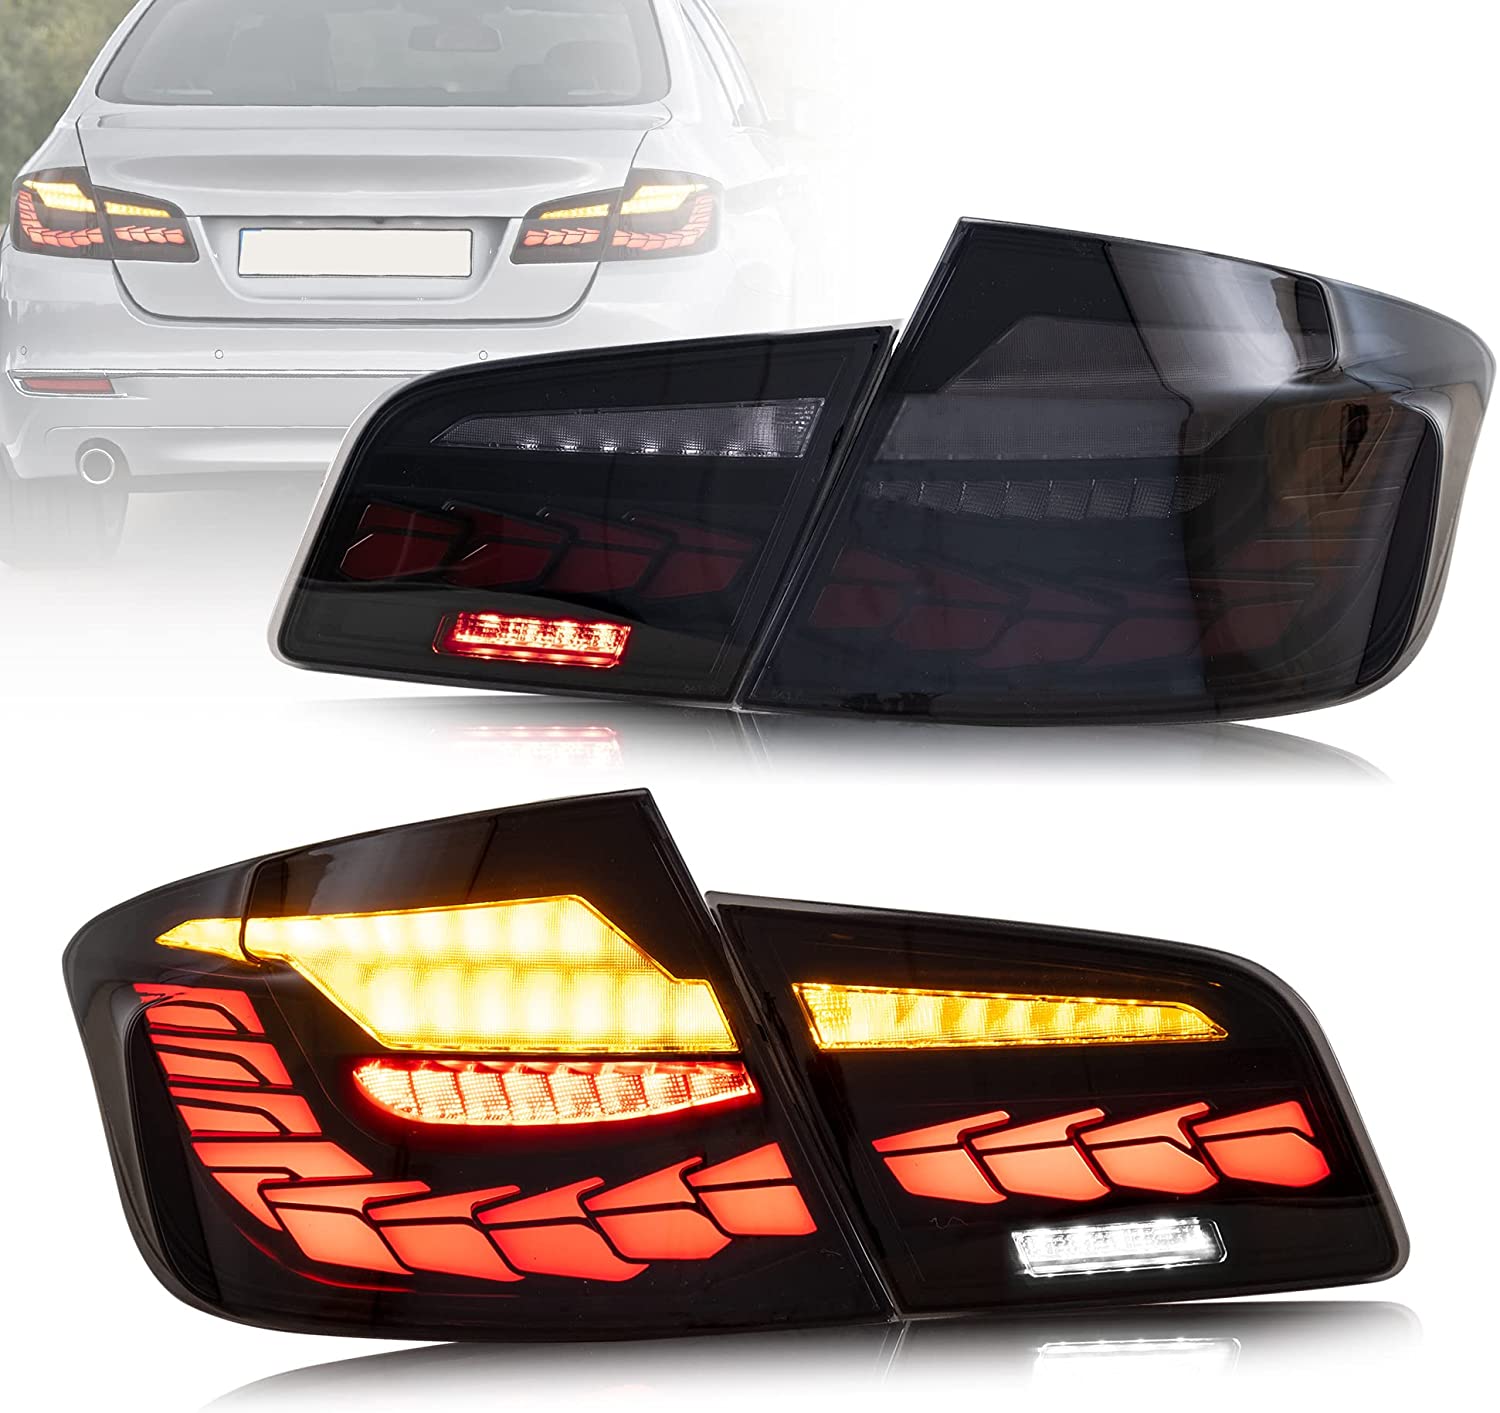 GTS STYLE OLED SEQUENTIAL TAILLIGHTS FOR BMW 5 SERIES F10 & F18